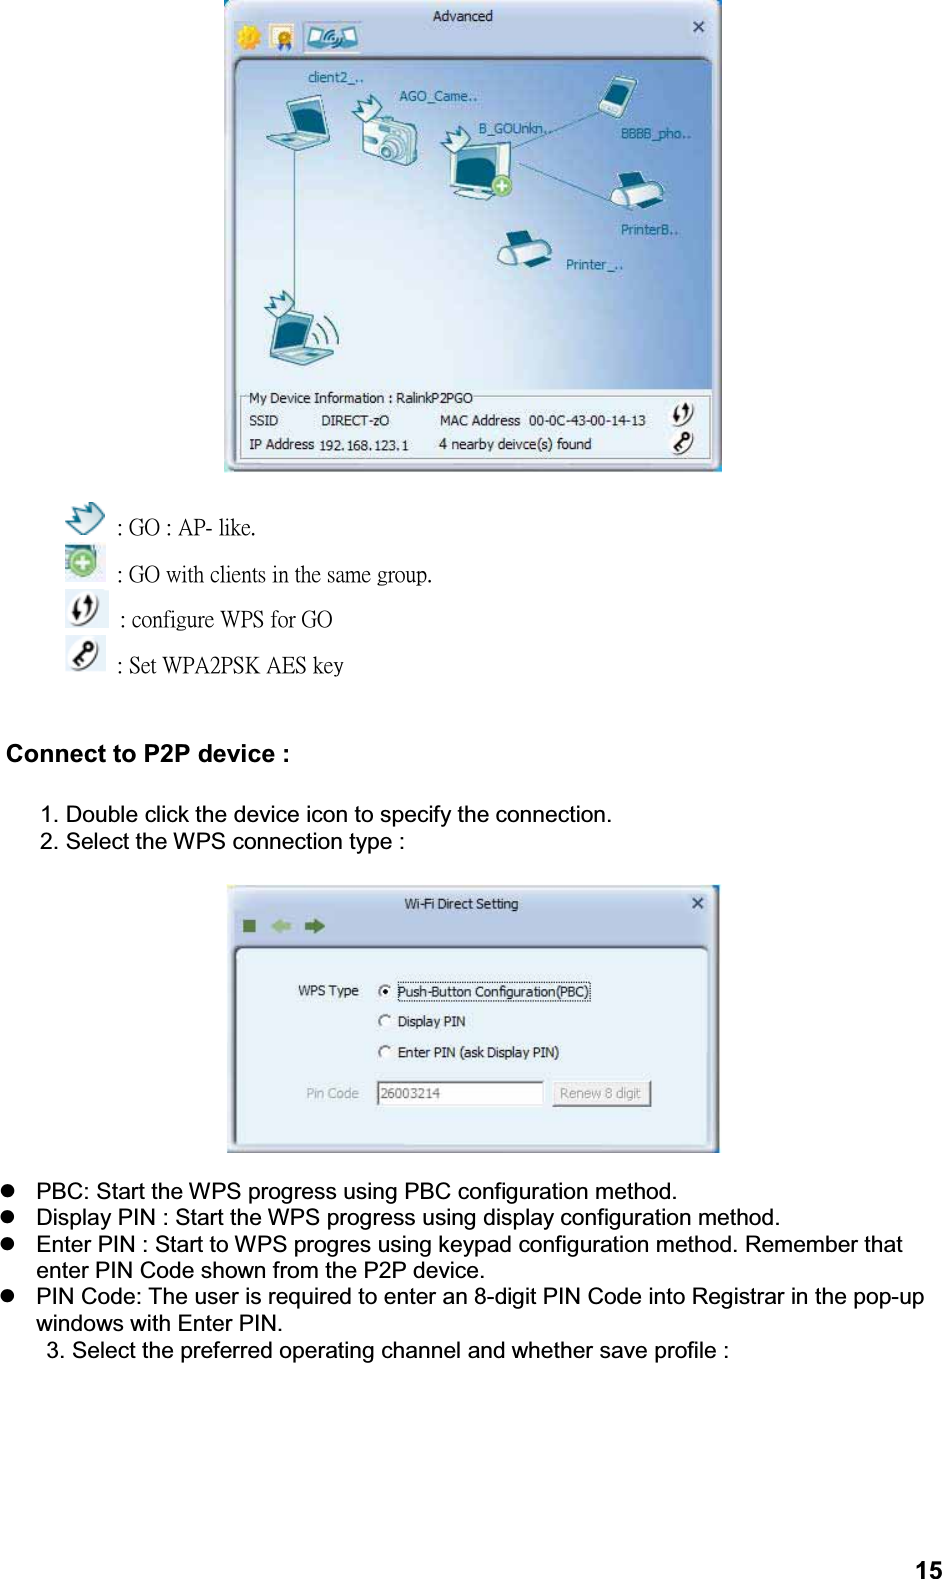 15: GO : AP- like.: GO with clients in the same group.: configure WPS for GO: Set WPA2PSK AES keyConnect to P2P device :1. Double click the device icon to specify the connection.2. Select the WPS connection type :zPBC: Start the WPS progress using PBC configuration method.zDisplay PIN : Start the WPS progress using display configuration method.zEnter PIN : Start to WPS progres using keypad configuration method. Remember that enter PIN Code shown from the P2P device.zPIN Code: The user is required to enter an 8-digit PIN Code into Registrar in the pop-up windows with Enter PIN.     3. Select the preferred operating channel and whether save profile :